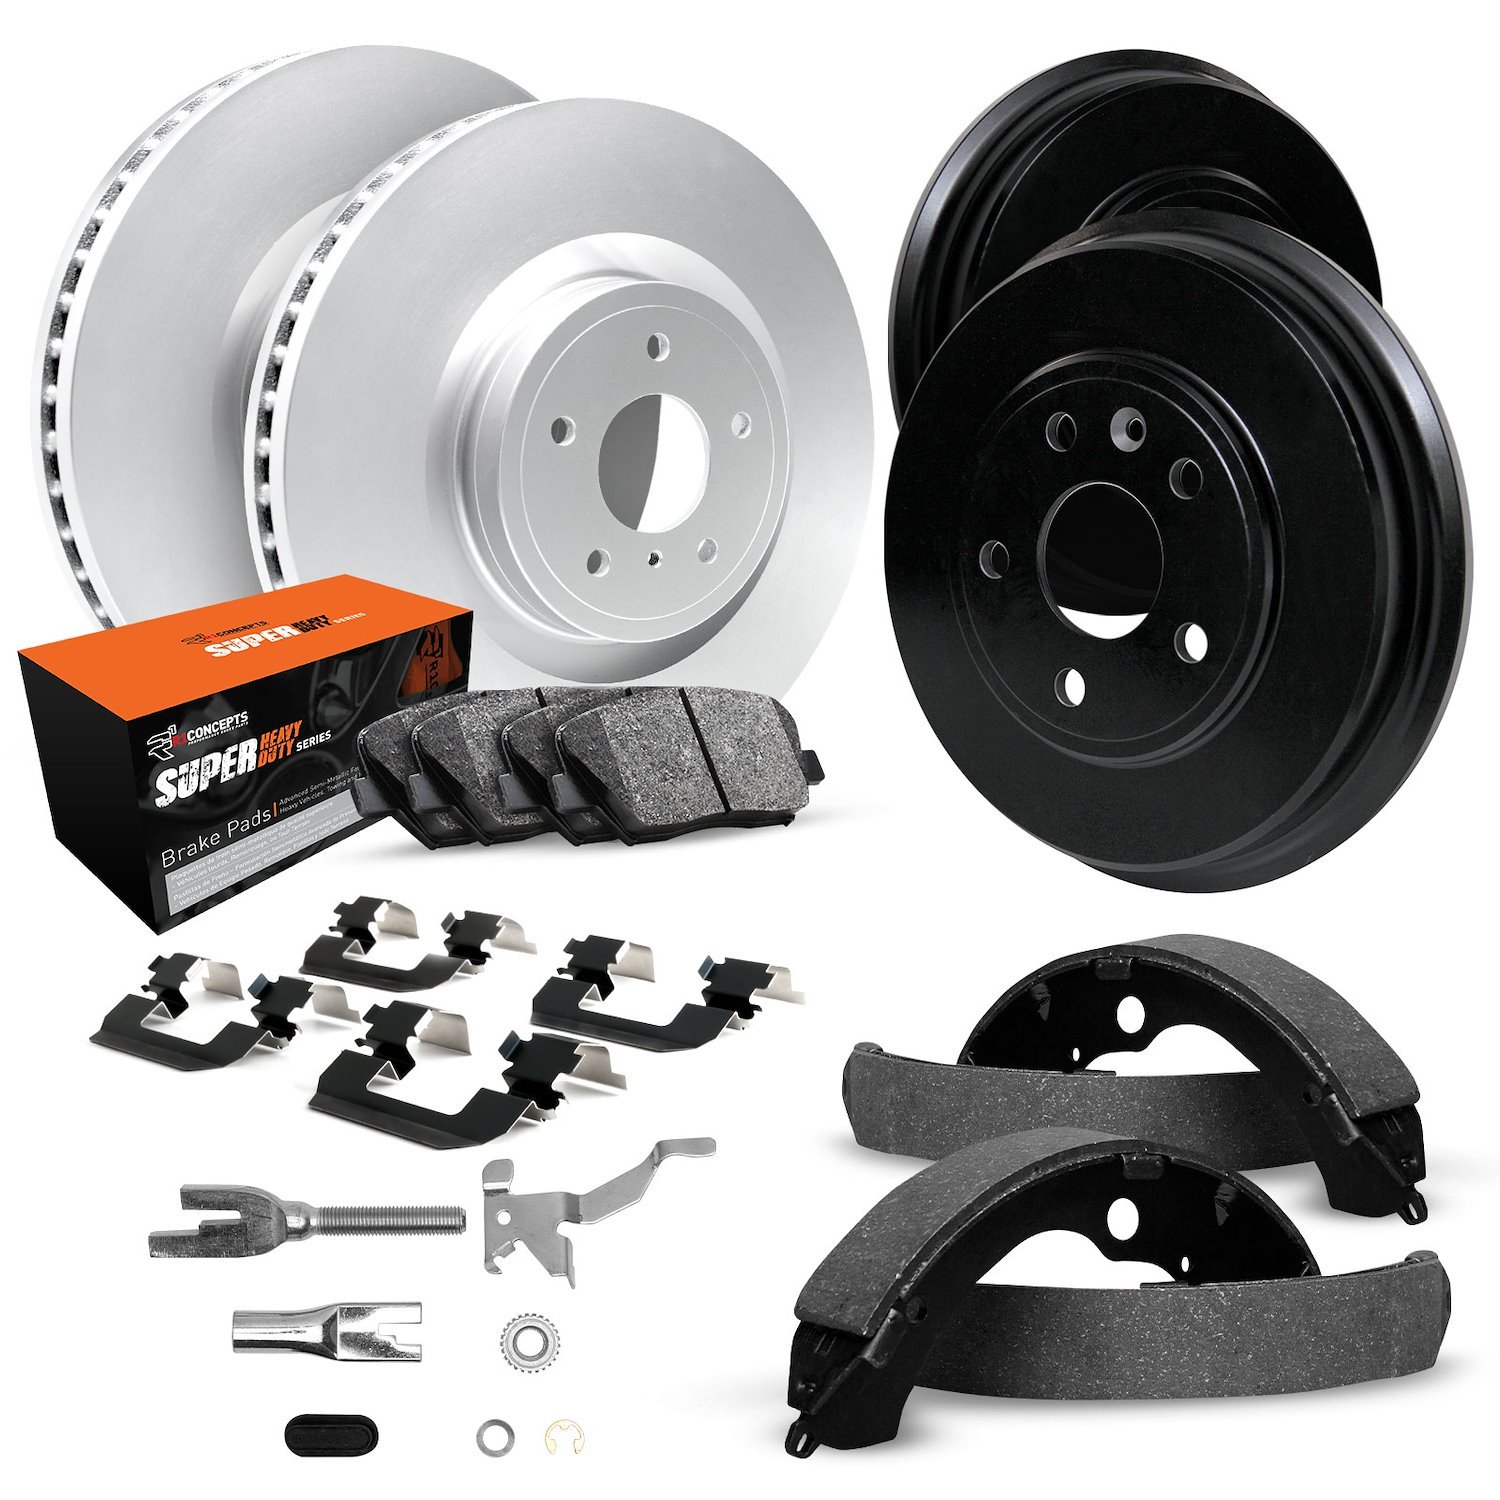 GEO-Carbon Brake Rotor & Drum Set w/Super-Duty Pads, Shoes, Hardware/Adjusters, 1979-1980 GM, Position: Front & Rear